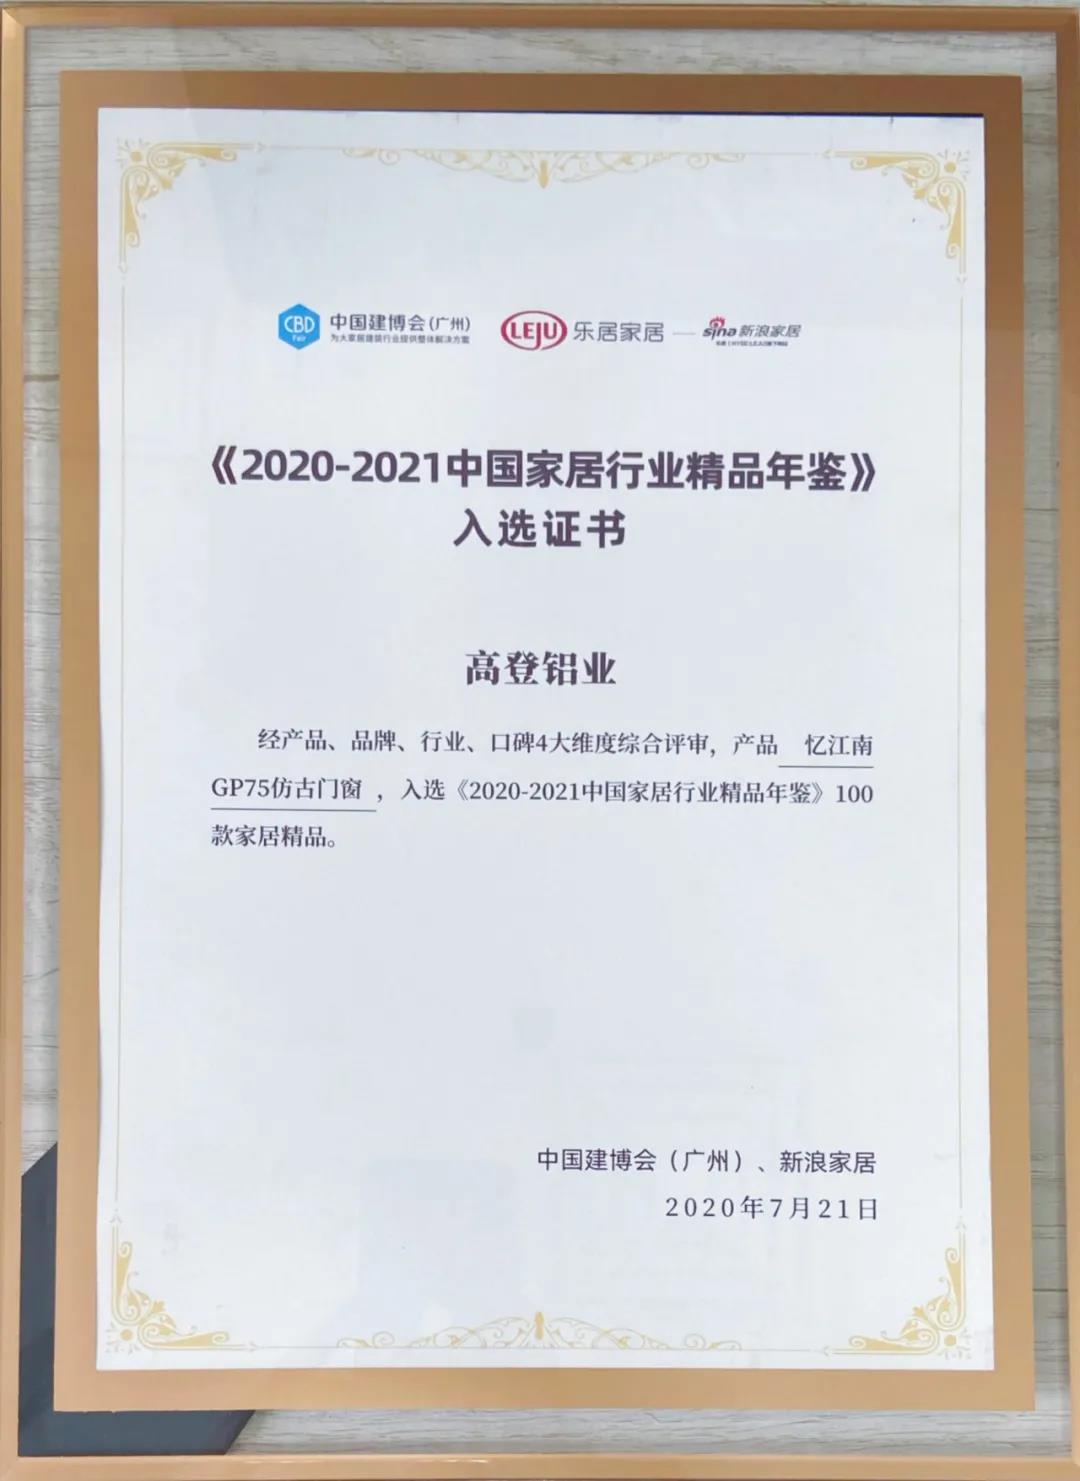 2021 Golden Selected in China Home Furnishing Industry Quality Yearbook 2020-2021